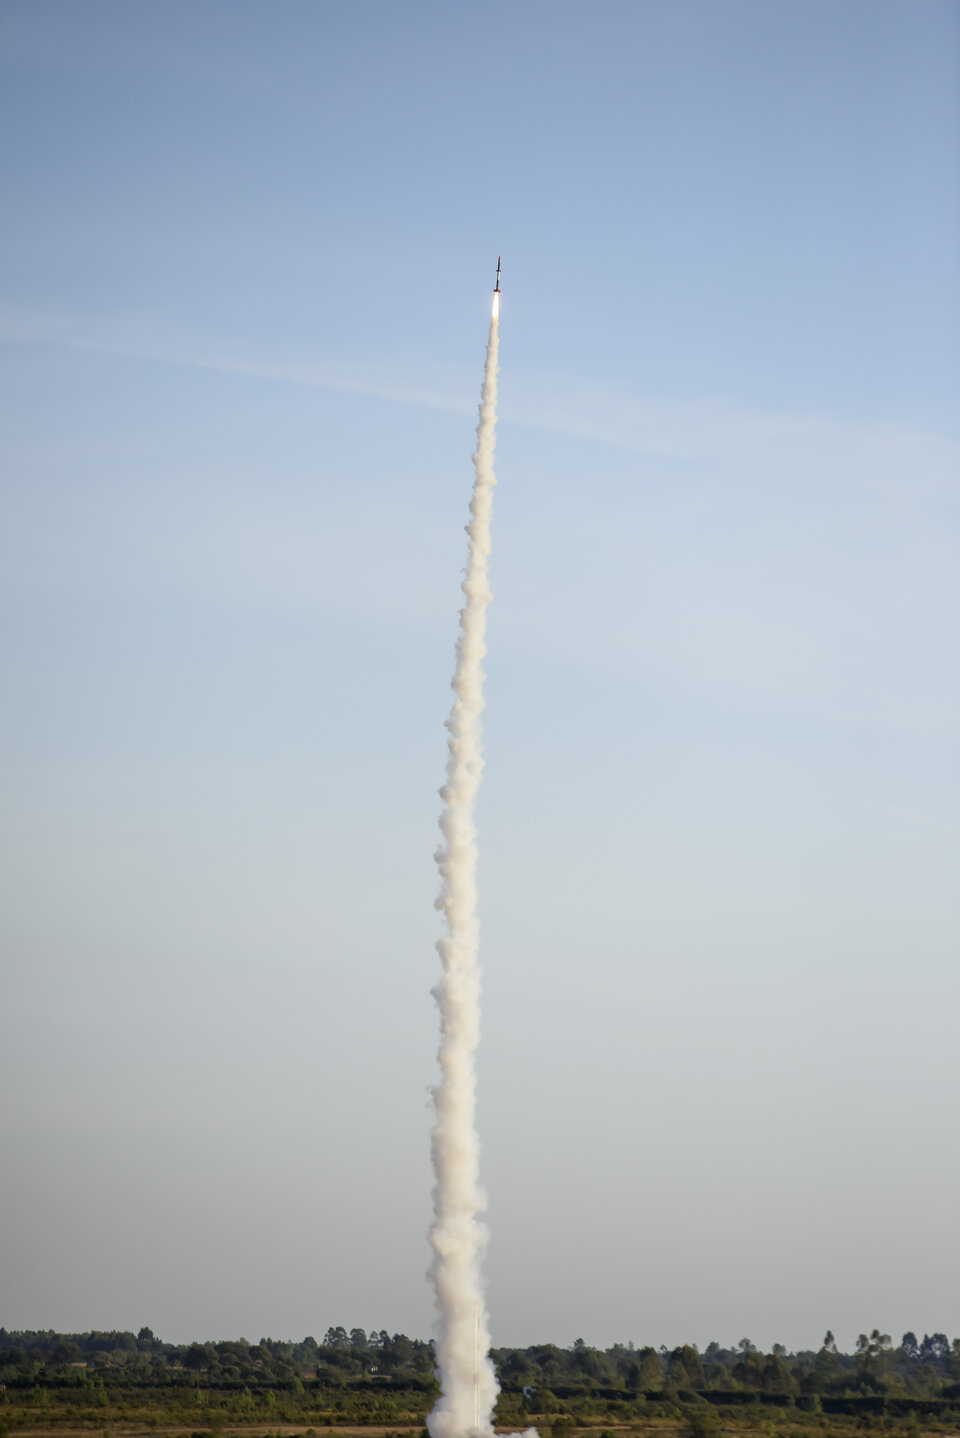 Launch of a student rocket during the European Rocketry Challenge 2021